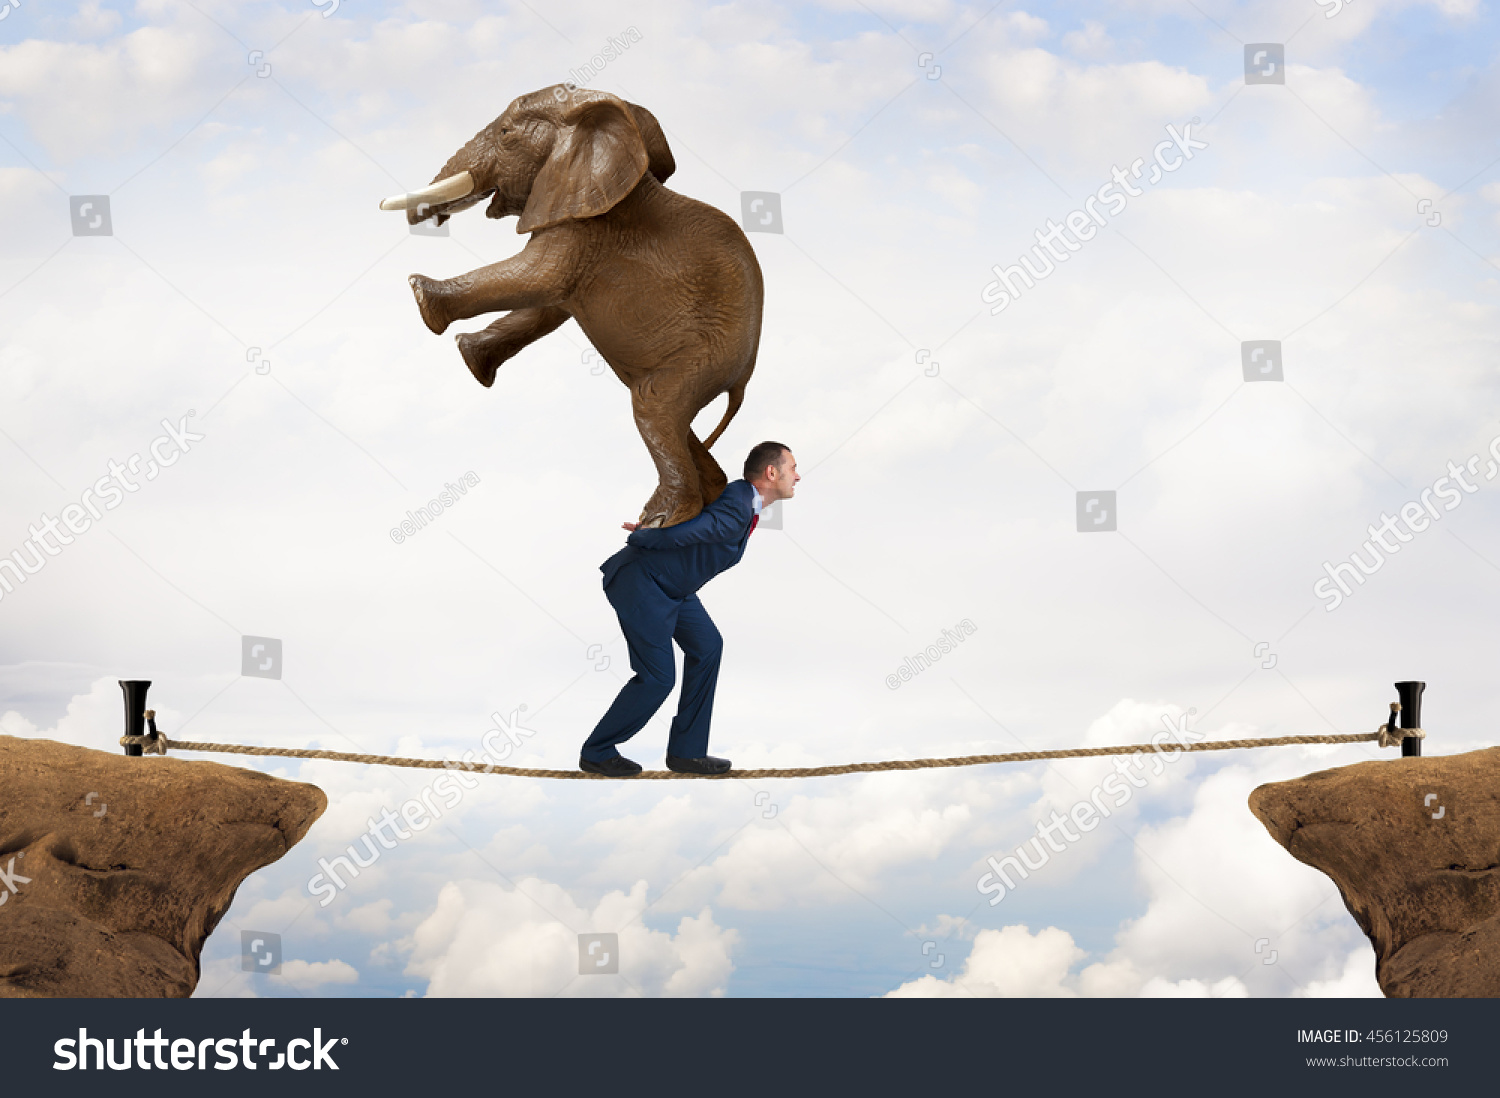 business challenge concept businessman carrying an elephant across a tightrope chasm #456125809